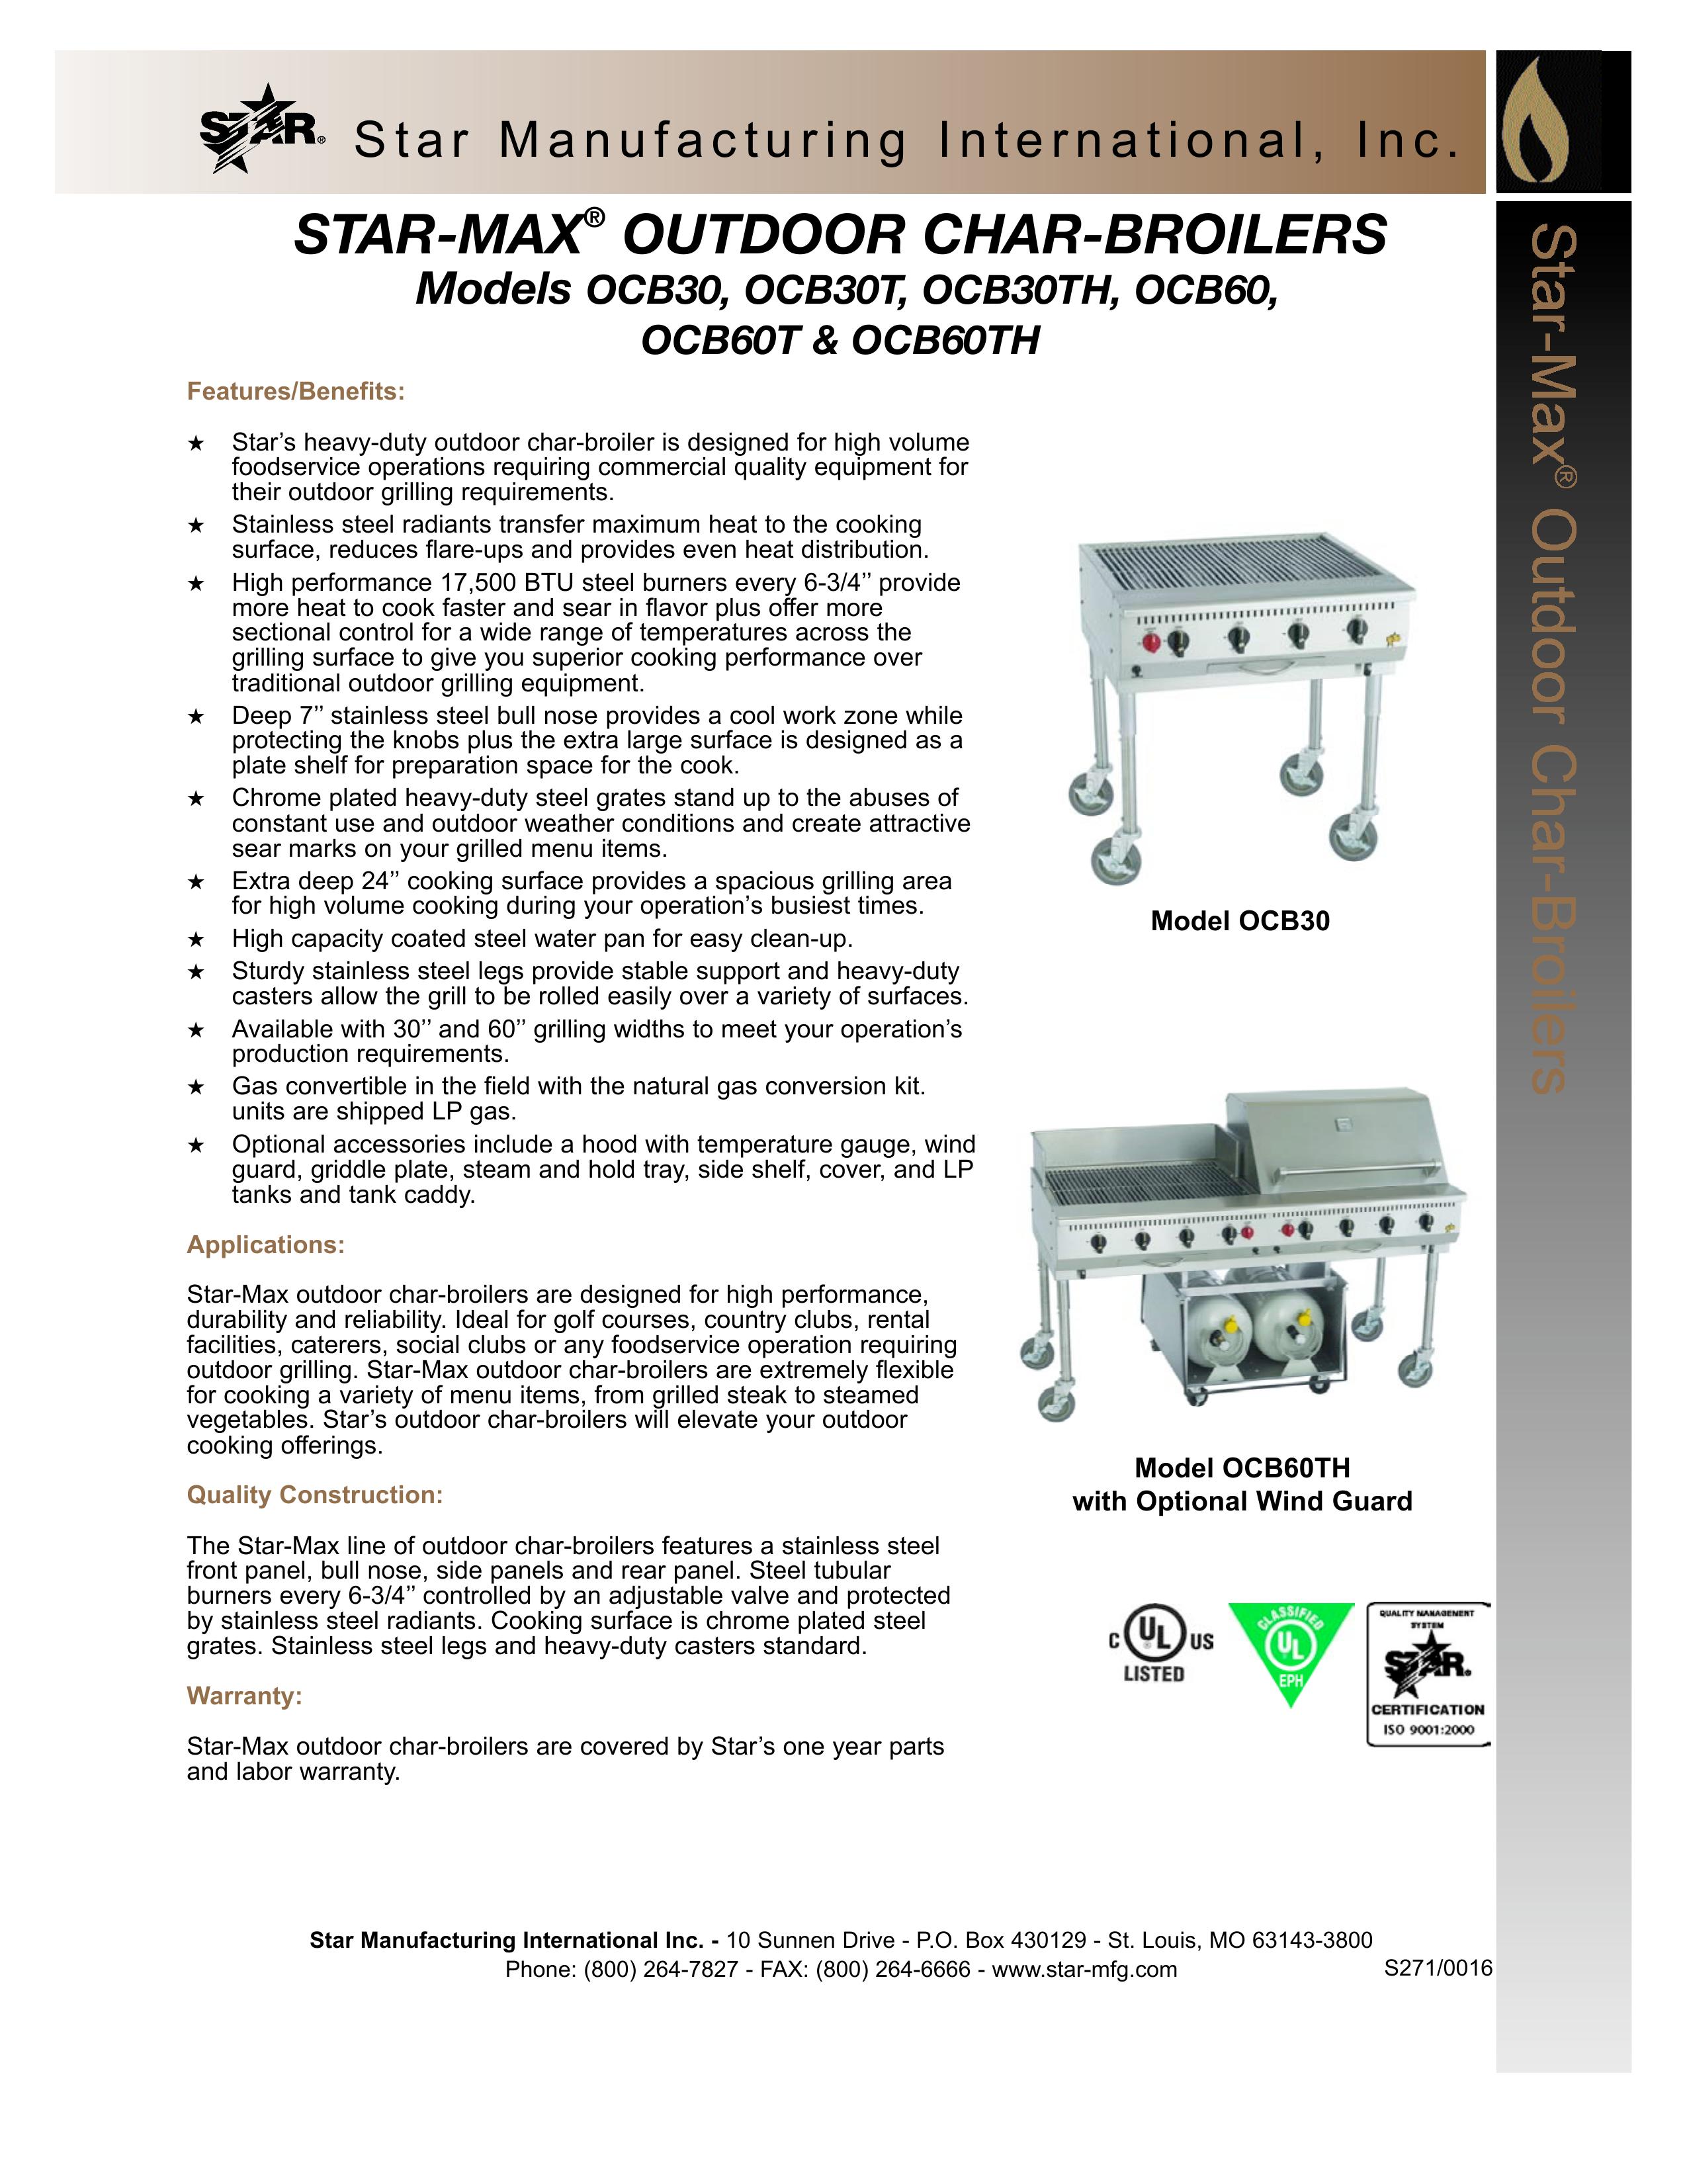 Star Manufacturing OCB30 Charcoal Grill User Manual